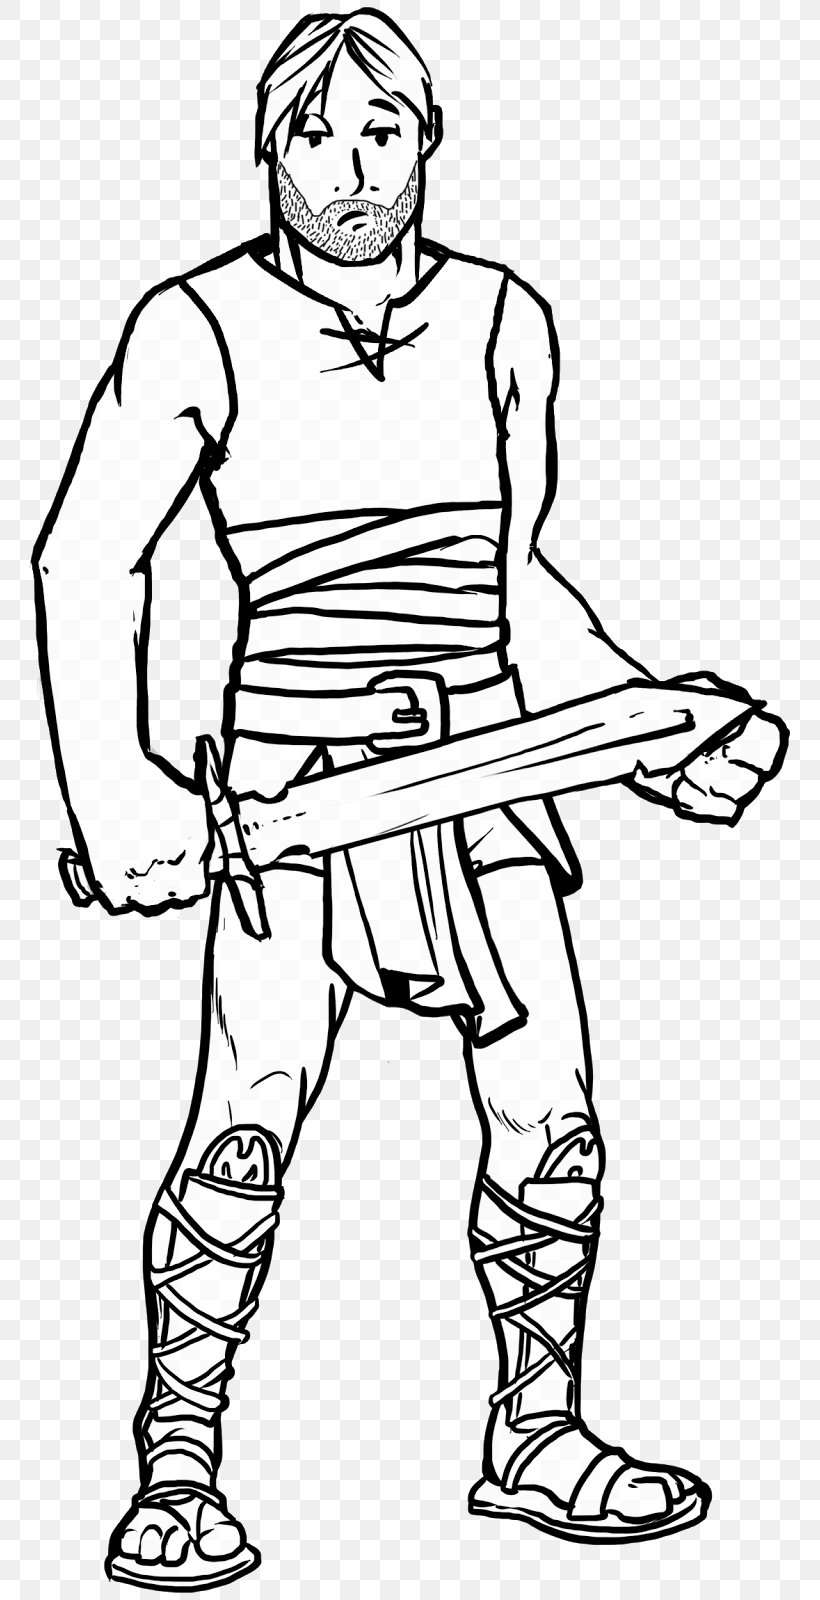 Gladiator character An illustration of a warrior or gladiator character or  sports mascot in a trojan or spartan style helmet  CanStock